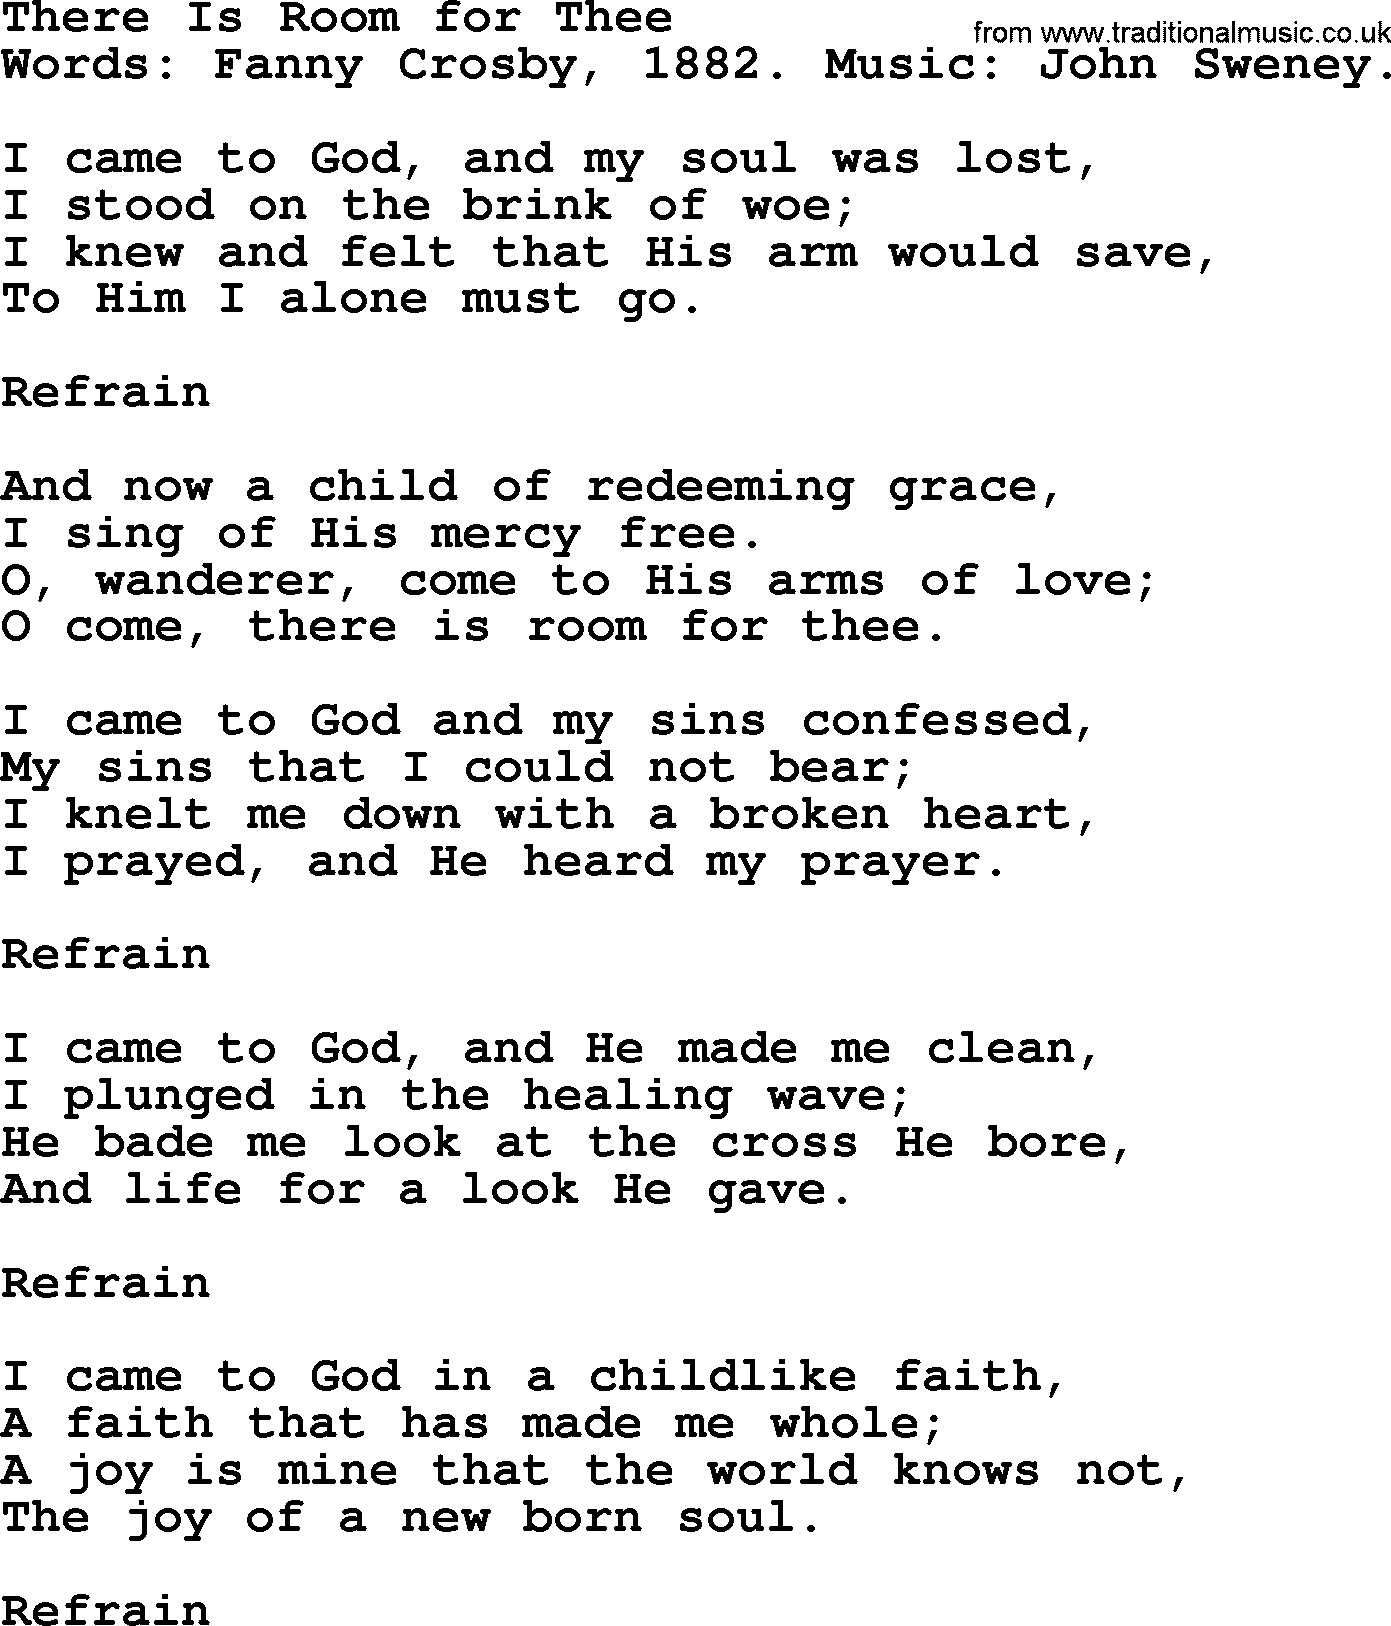 Fanny Crosby song: There Is Room For Thee, lyrics